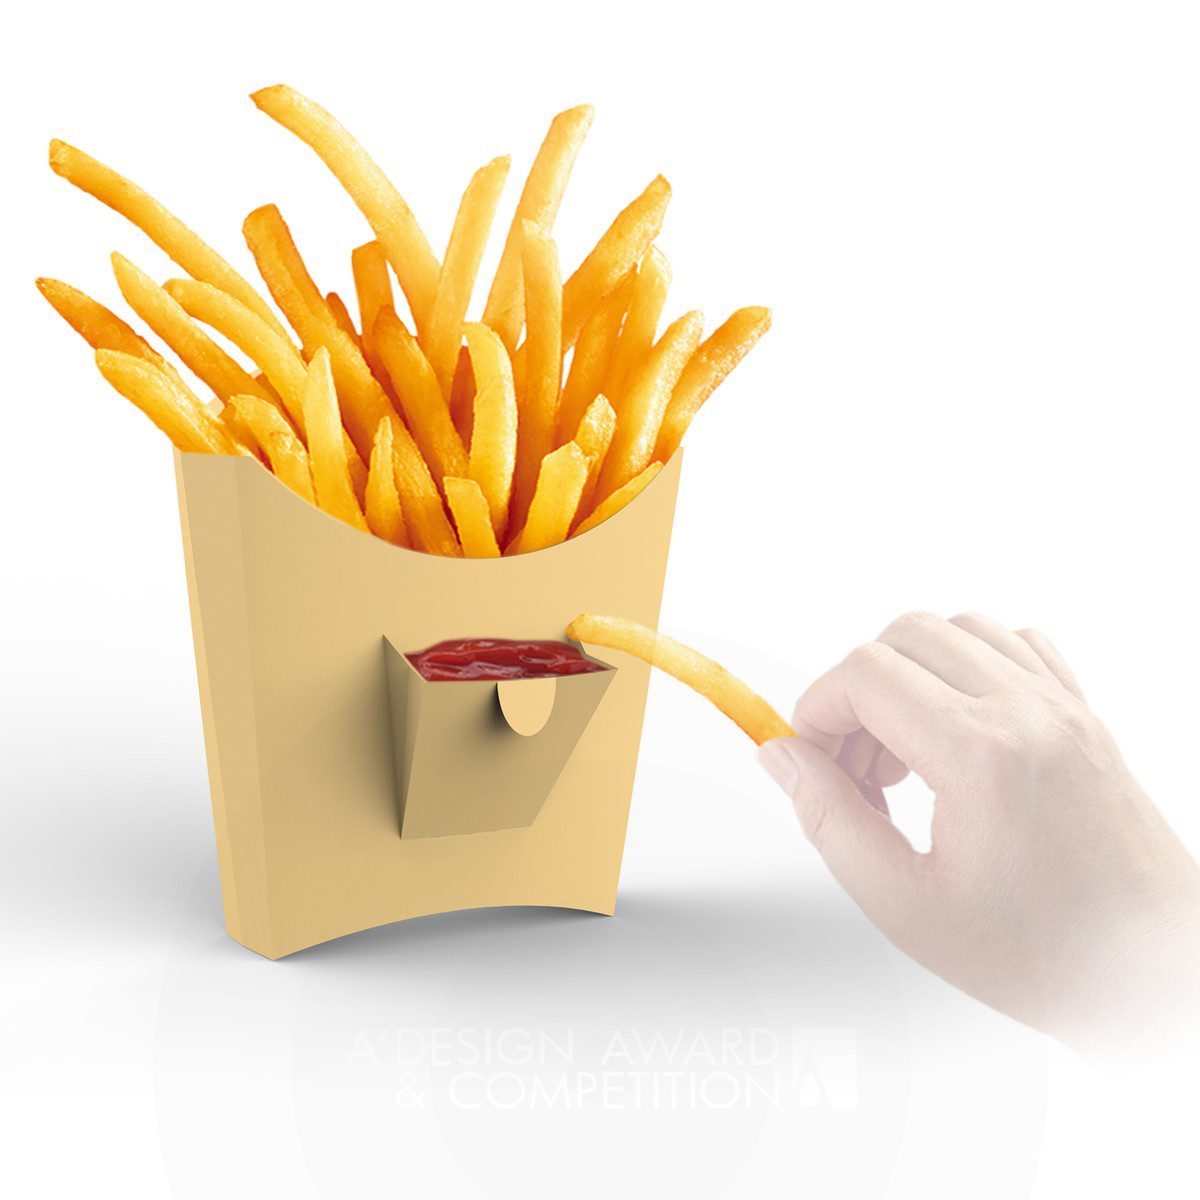 Little Pocket French fries box by Dong Jiang